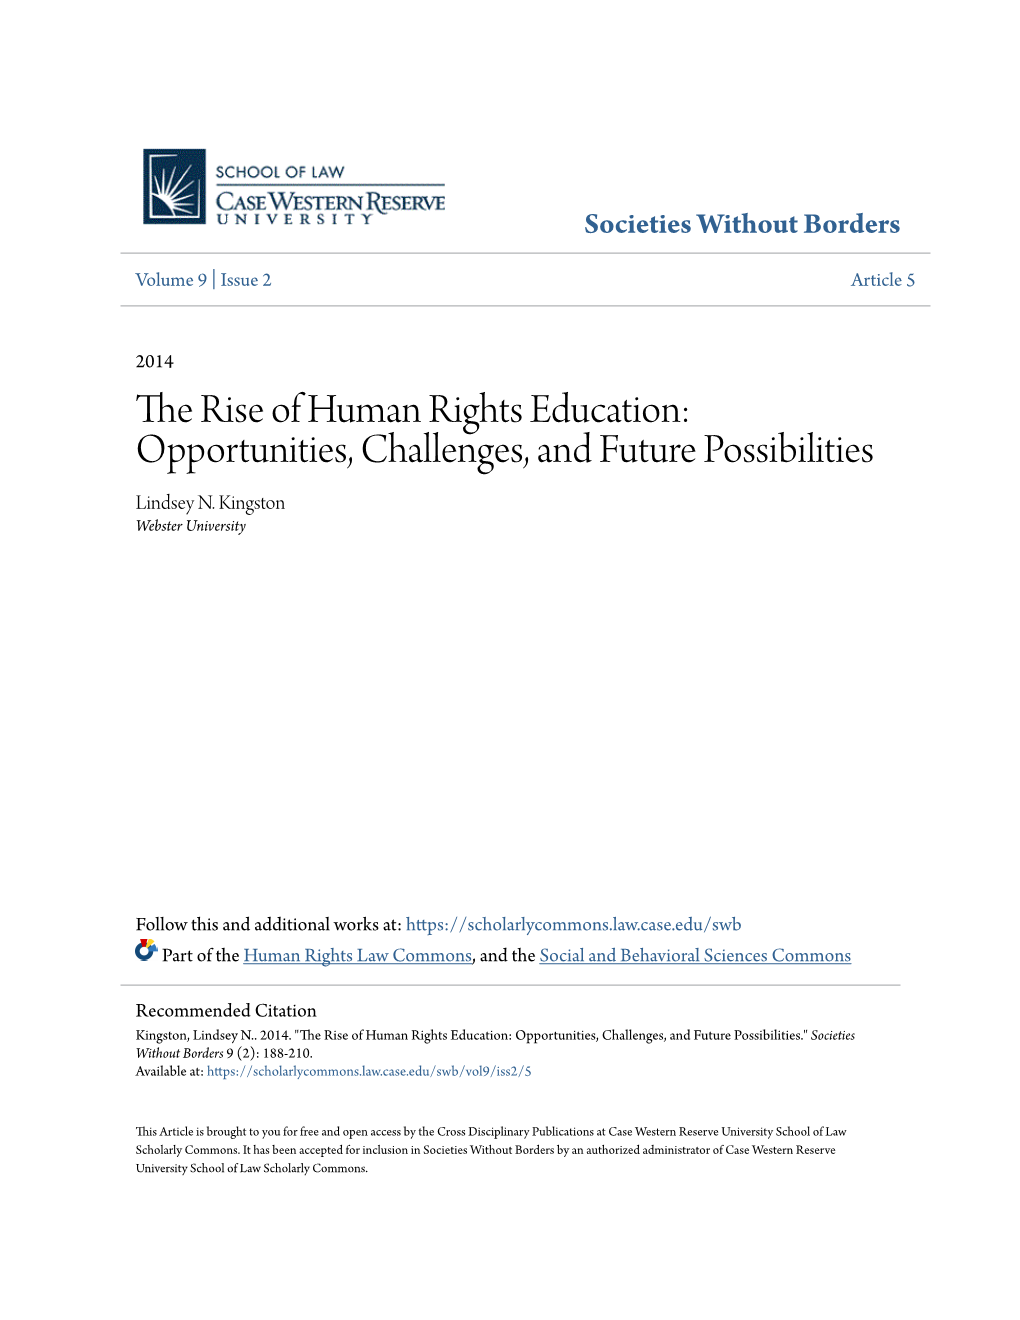 The Rise of Human Rights Education: Opportunities, Challenges, and Future Possibilities Lindsey N